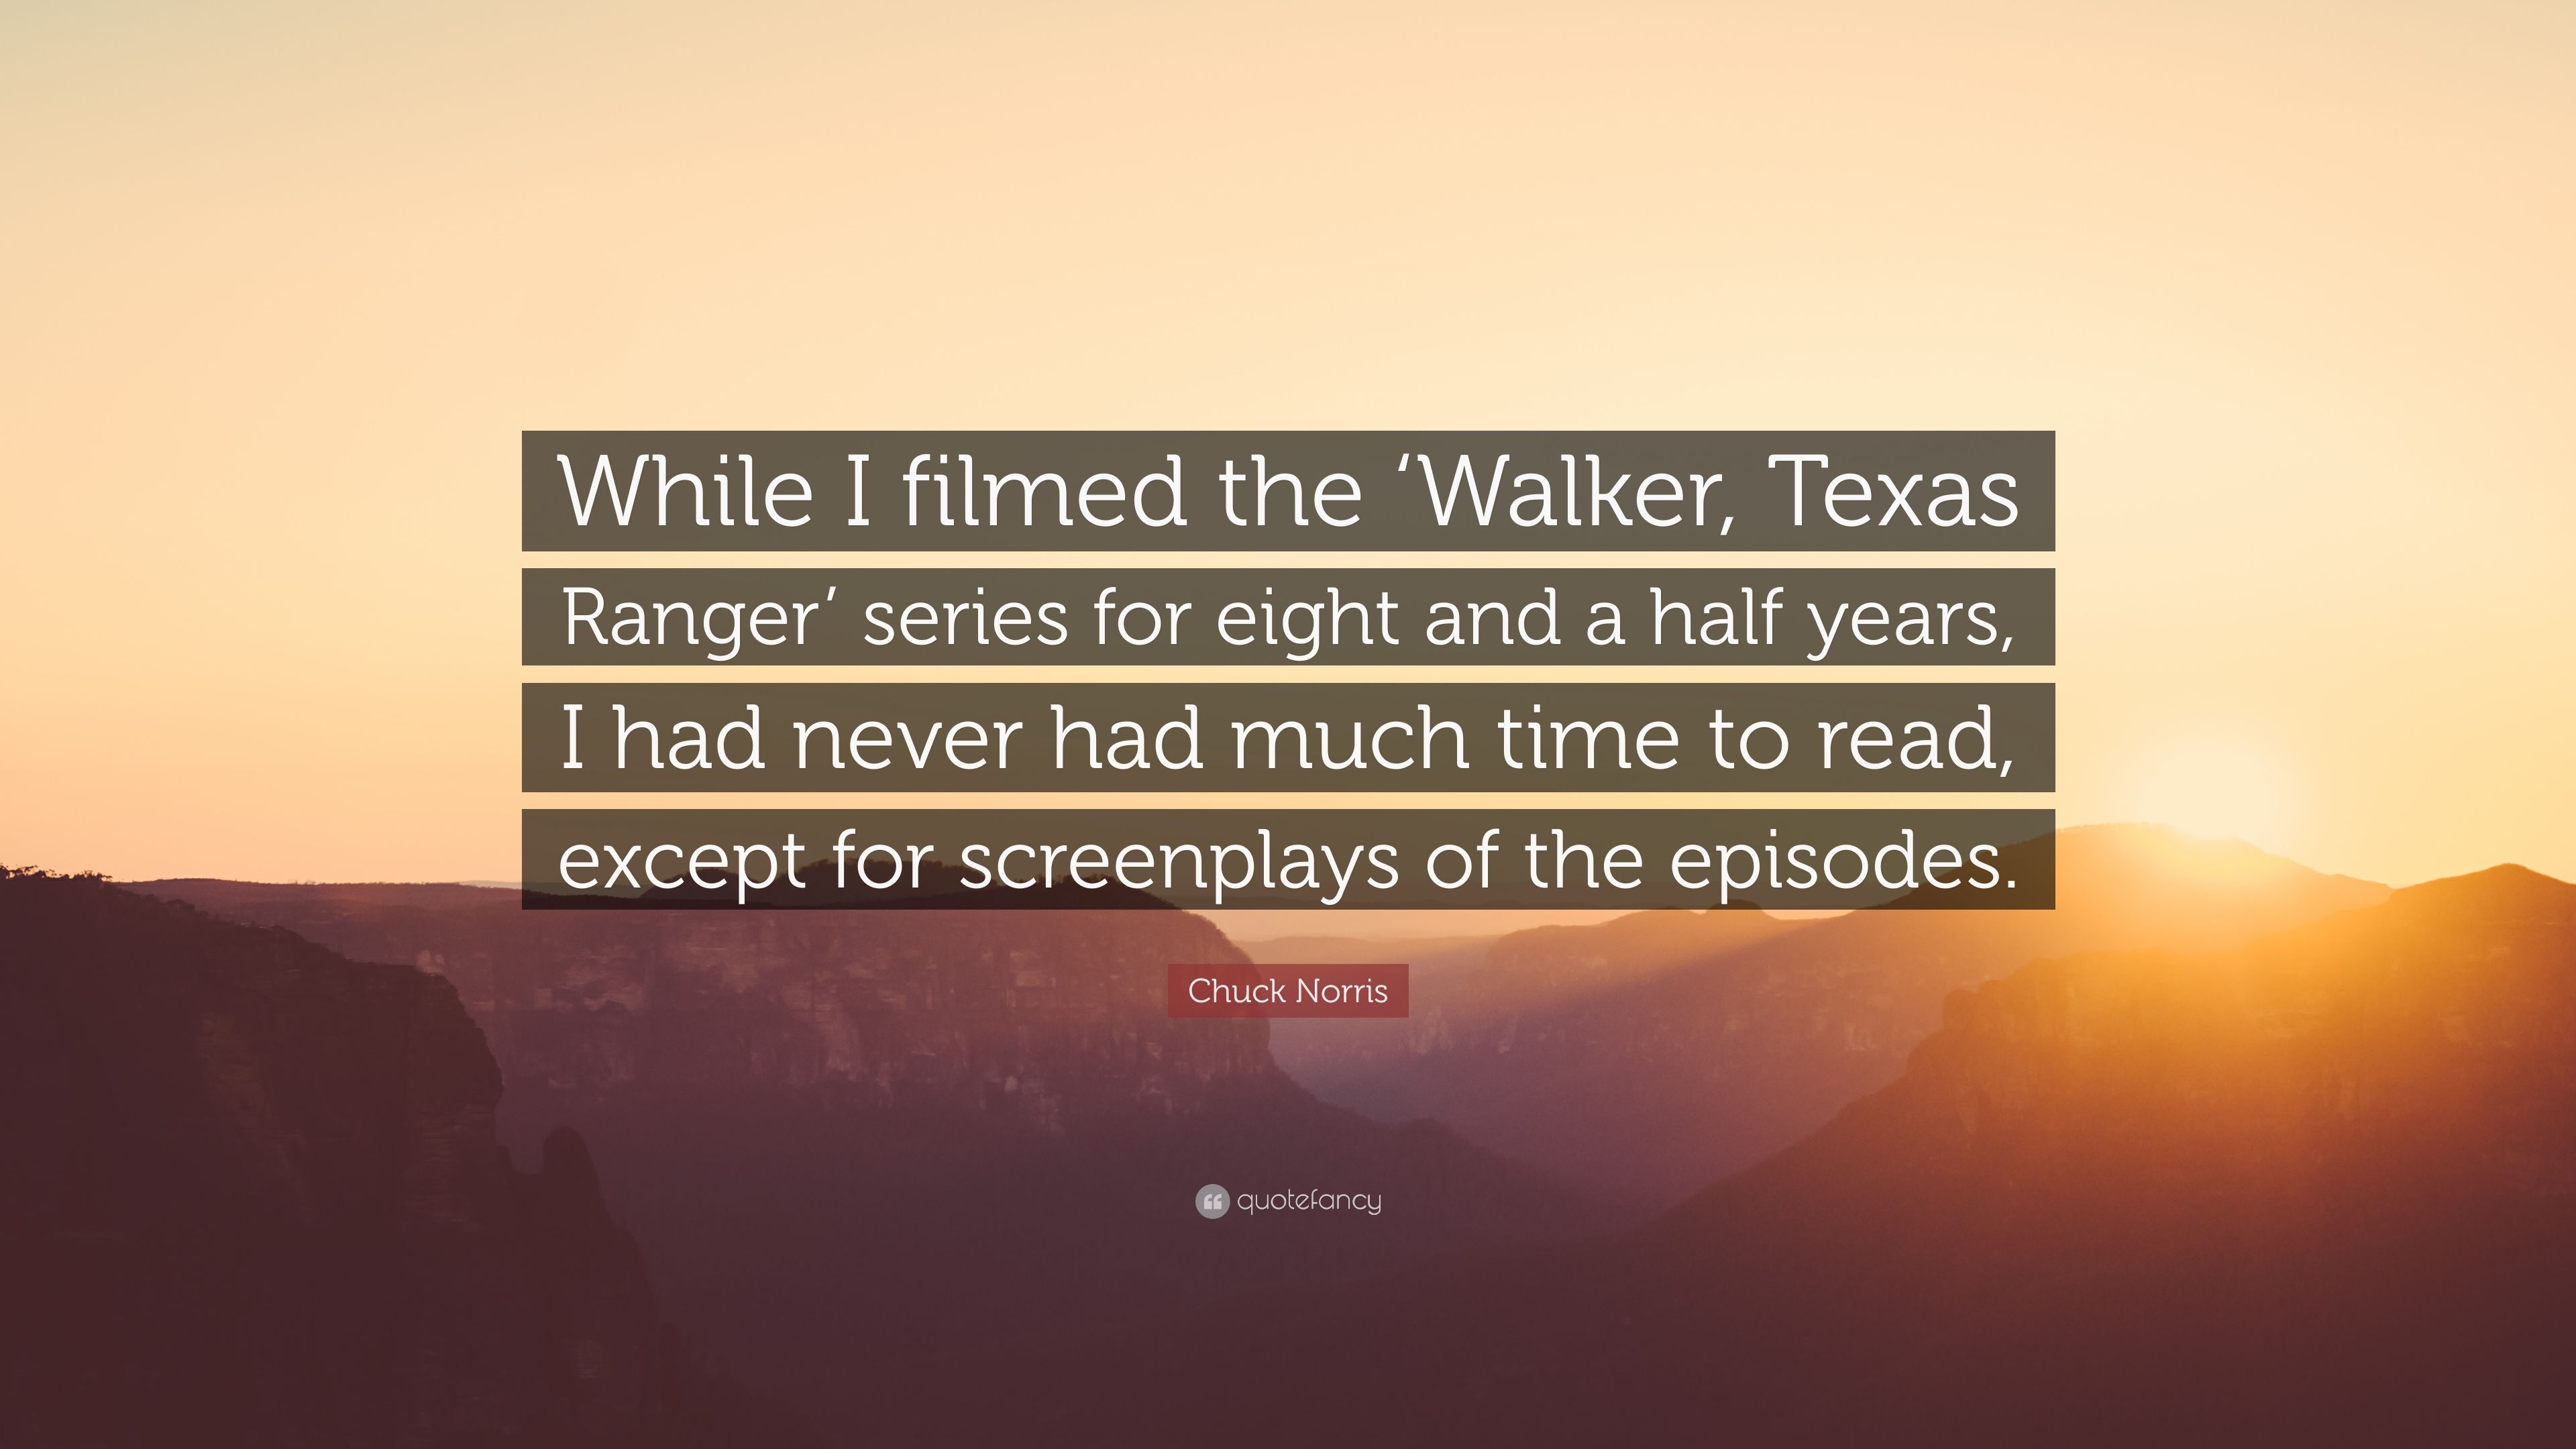 Chuck Norris Quote: “While I filmed the 'Walker, Texas Ranger' series for eight and a half years, I had never had much time to read, except f.”